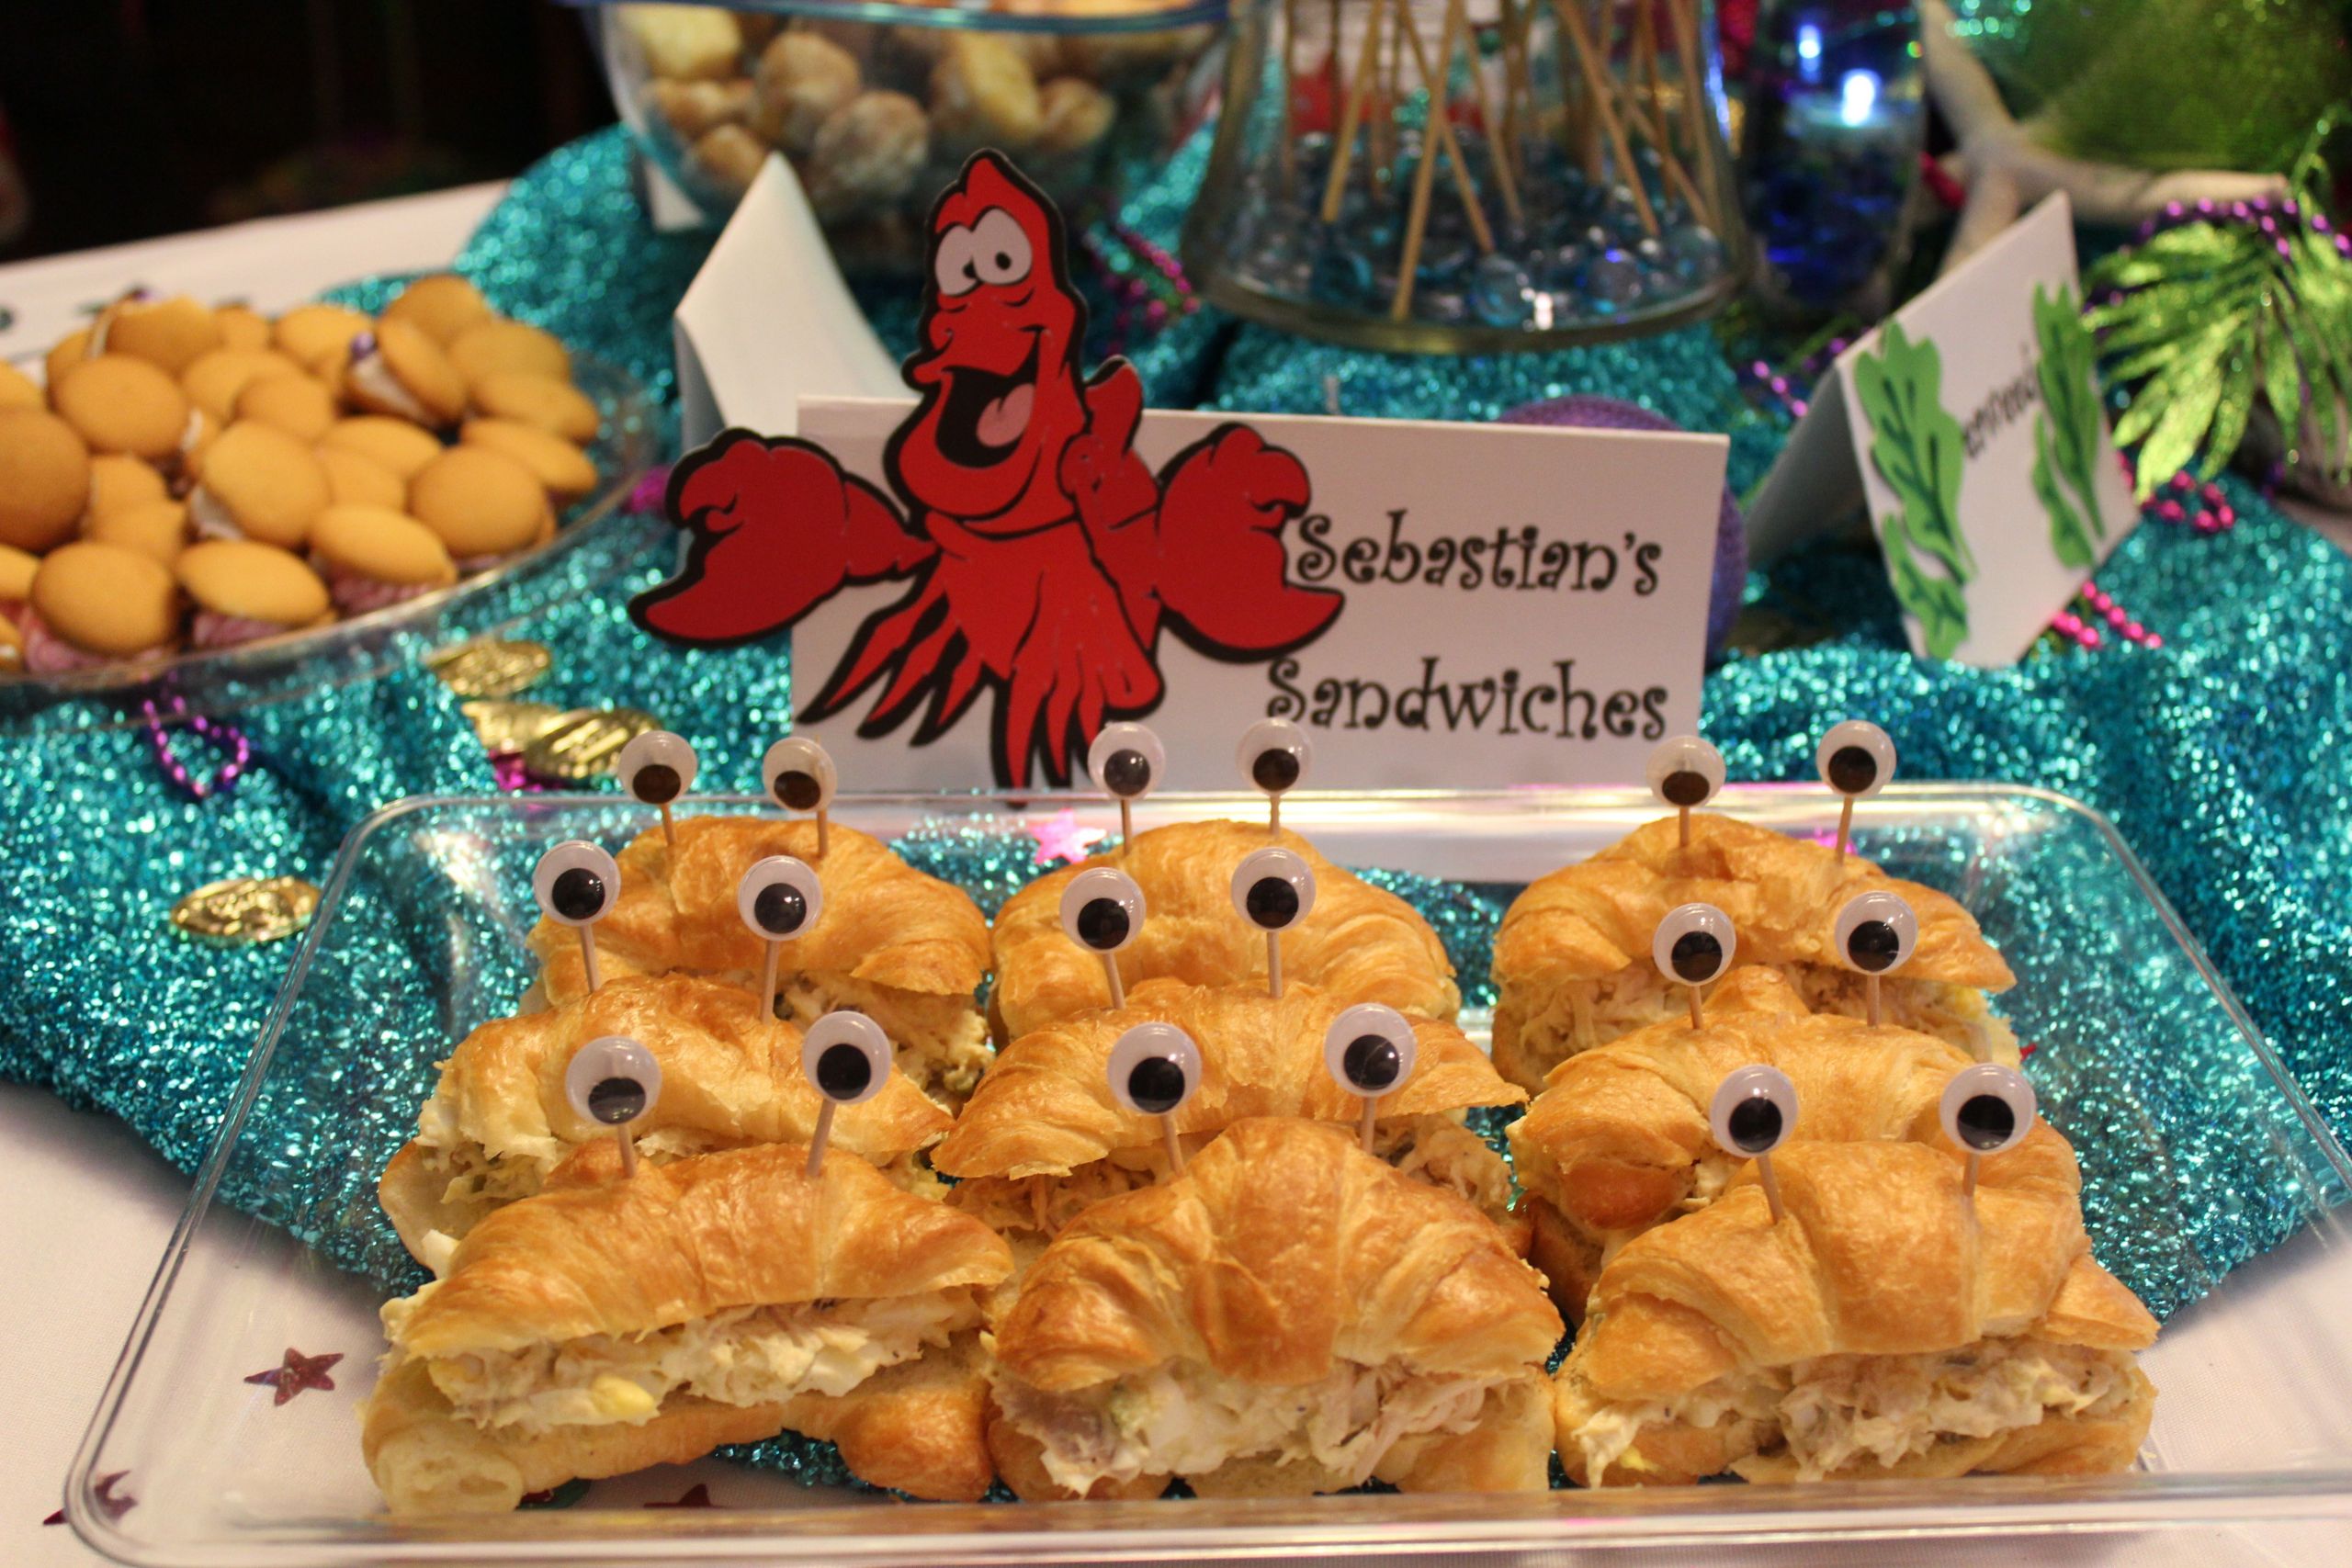 The Little Mermaid Party Food Ideas
 Under the Sea Little Mermaid Party Food Ideas Sebastian s